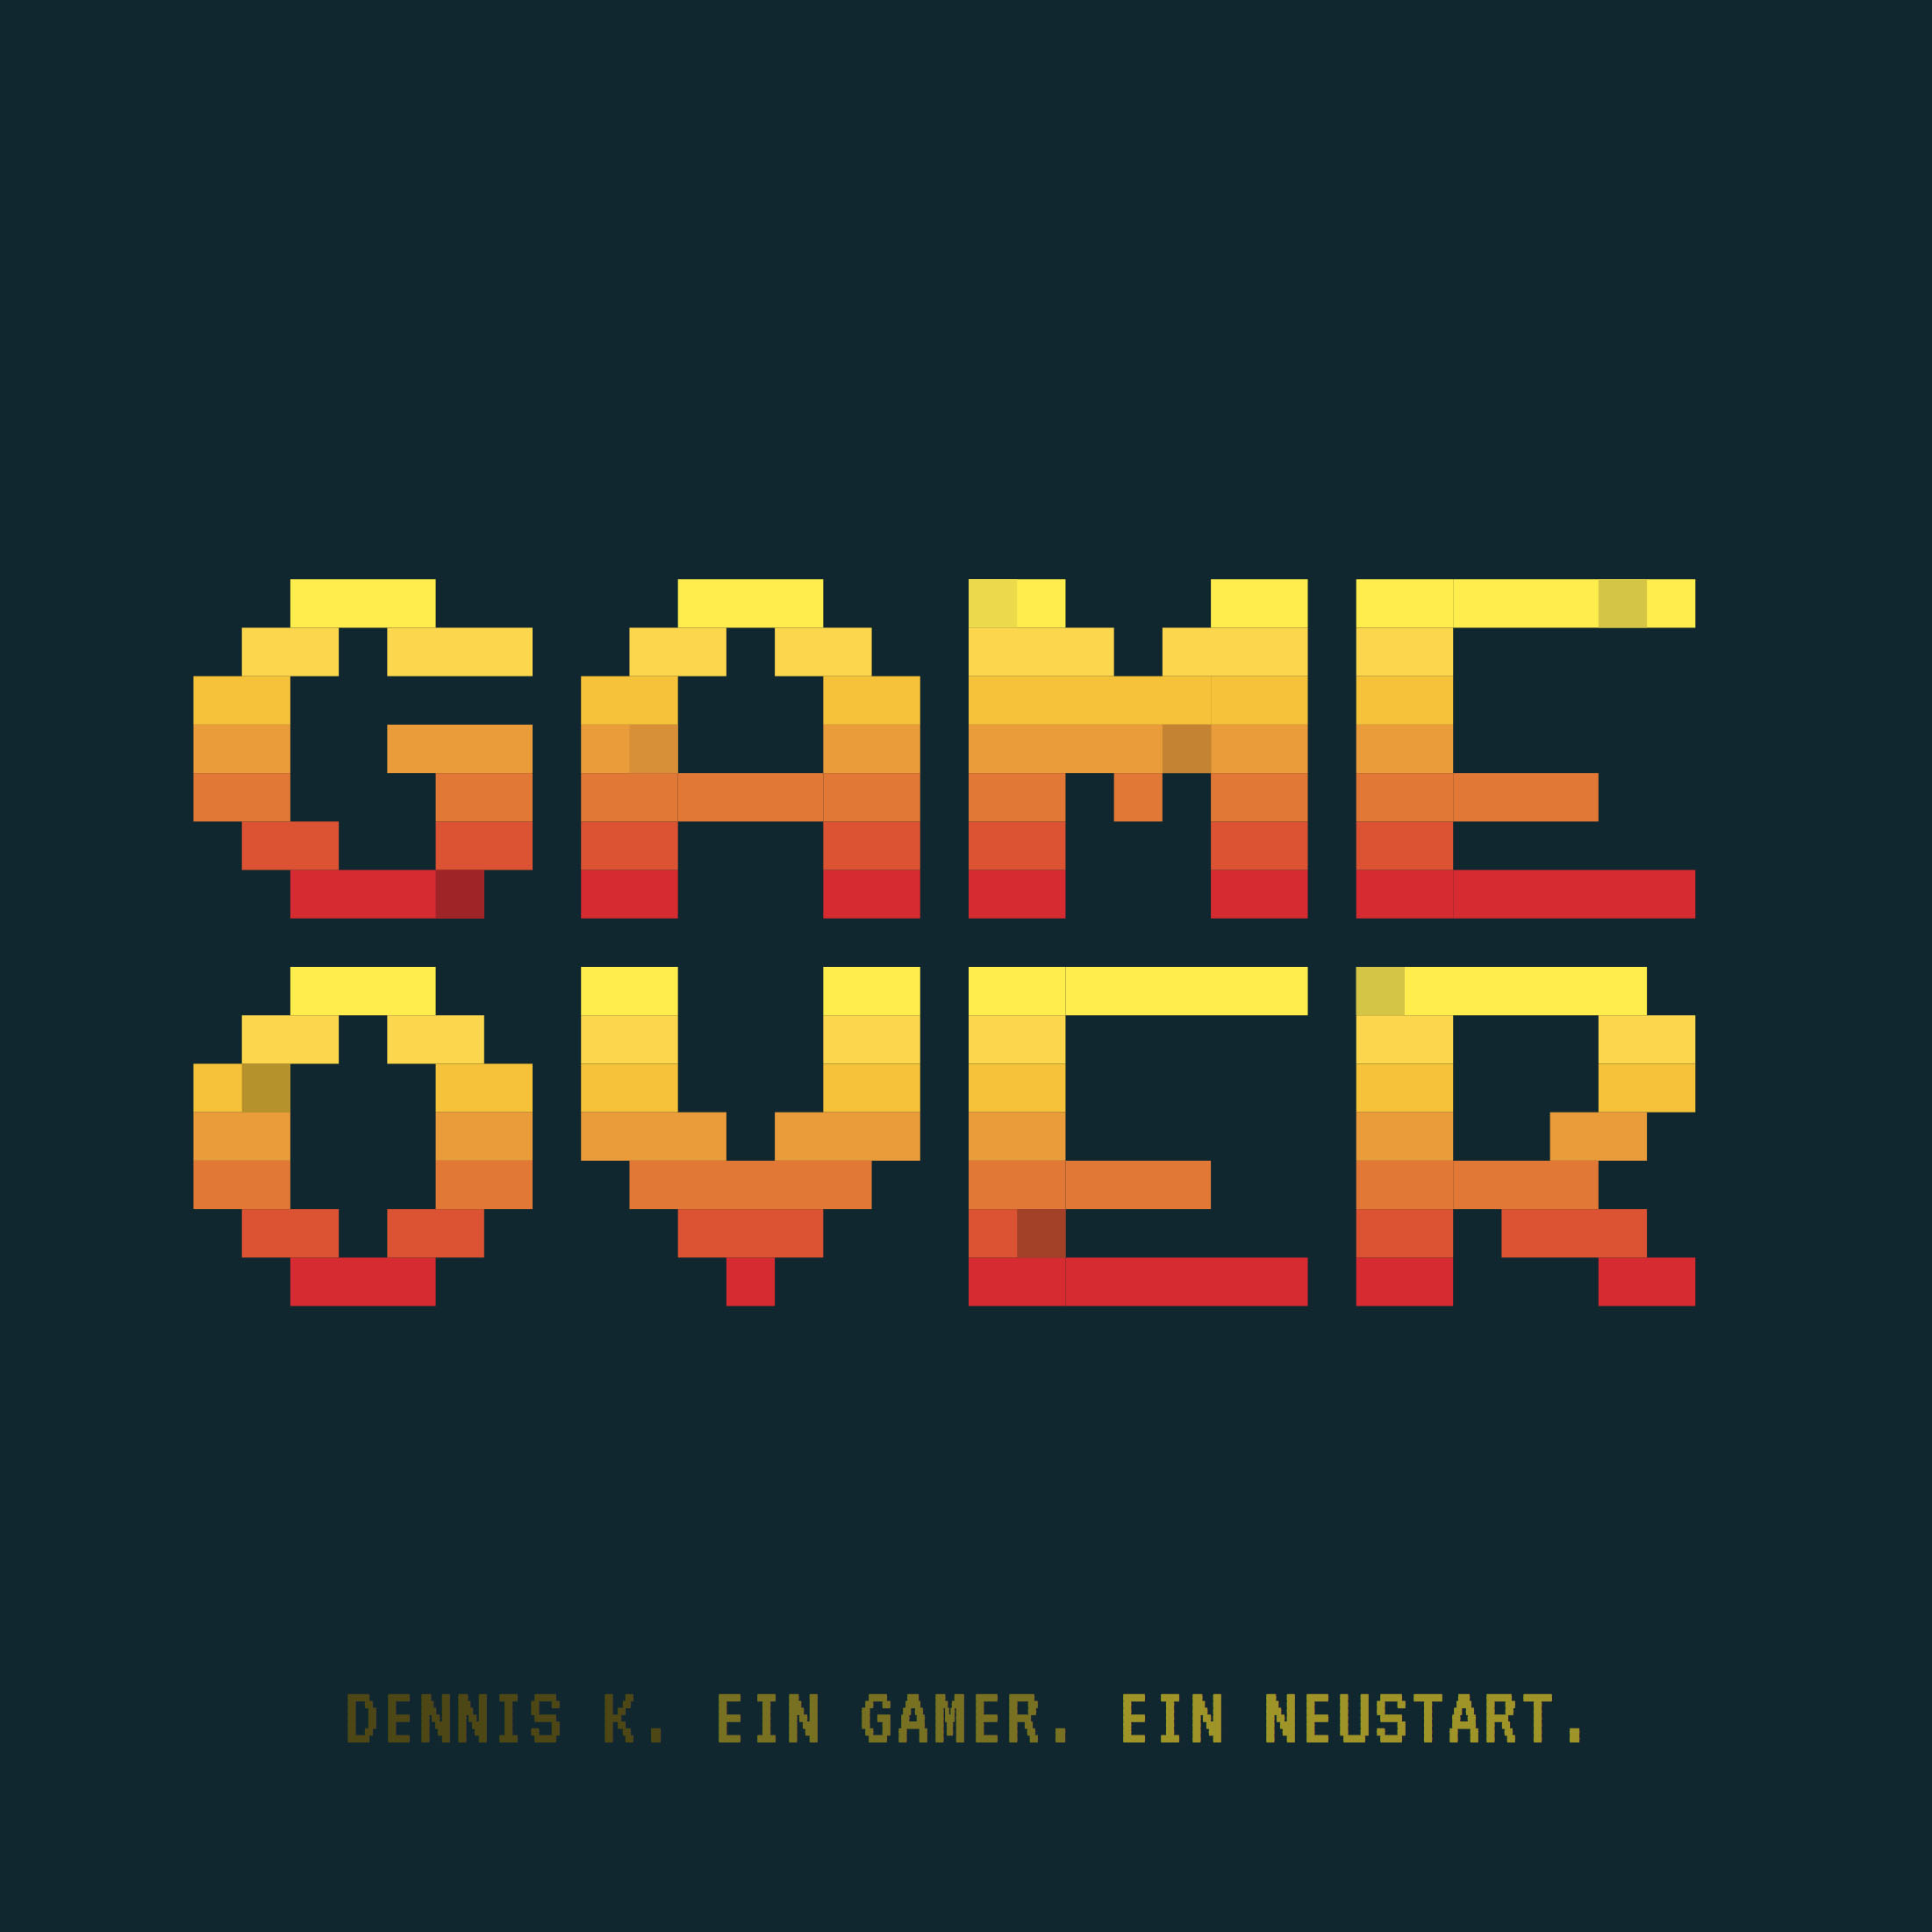 Game over Press r to restart. Game over. Pro Gamer тетрадь 48 желтый клетки game over. All over a game